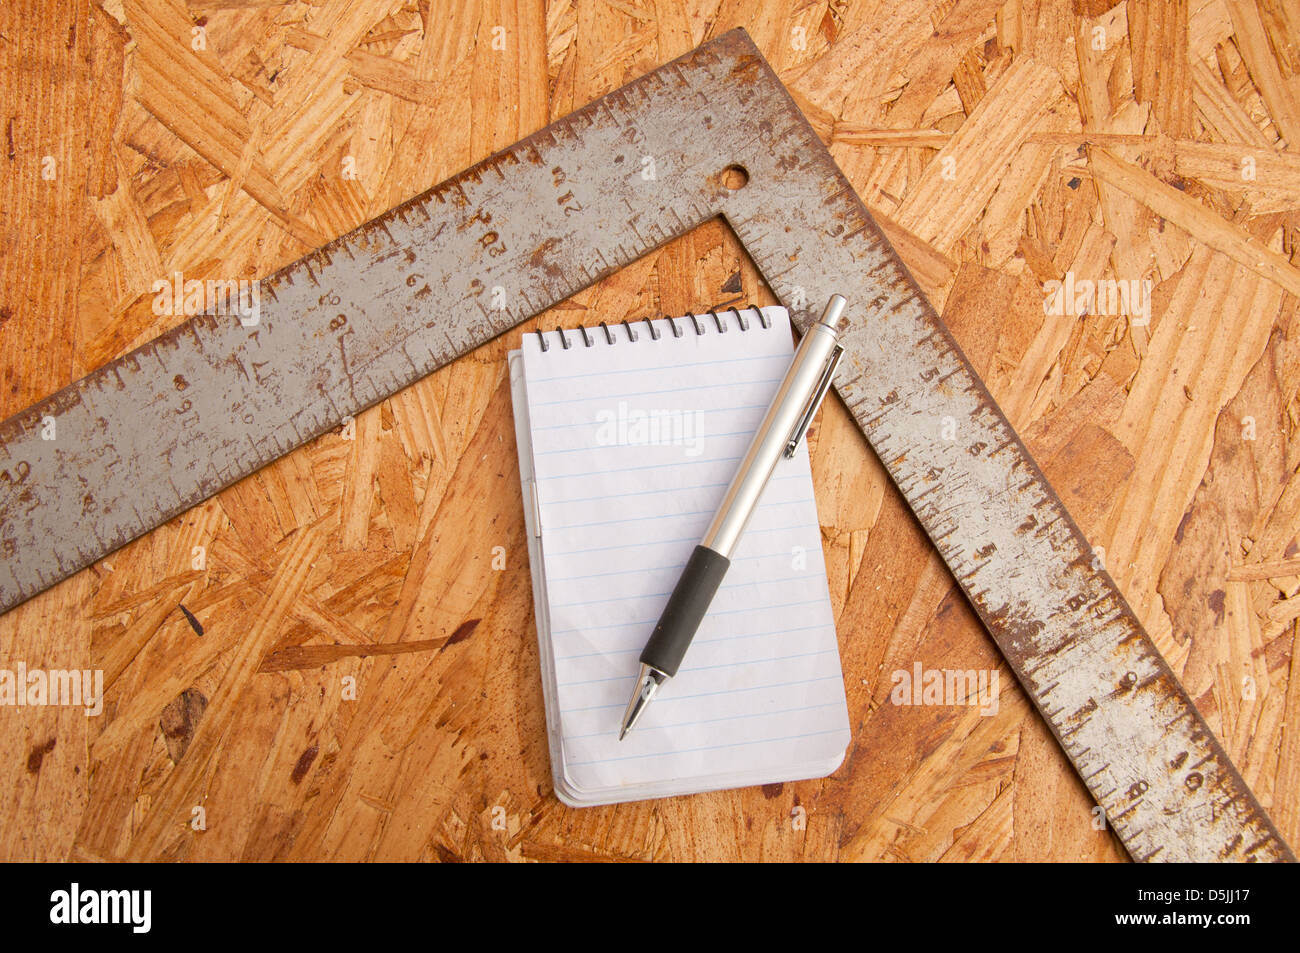 Carpenter's framing square, notepad and pen on top of wafer board - concept of wood working planning Stock Photo